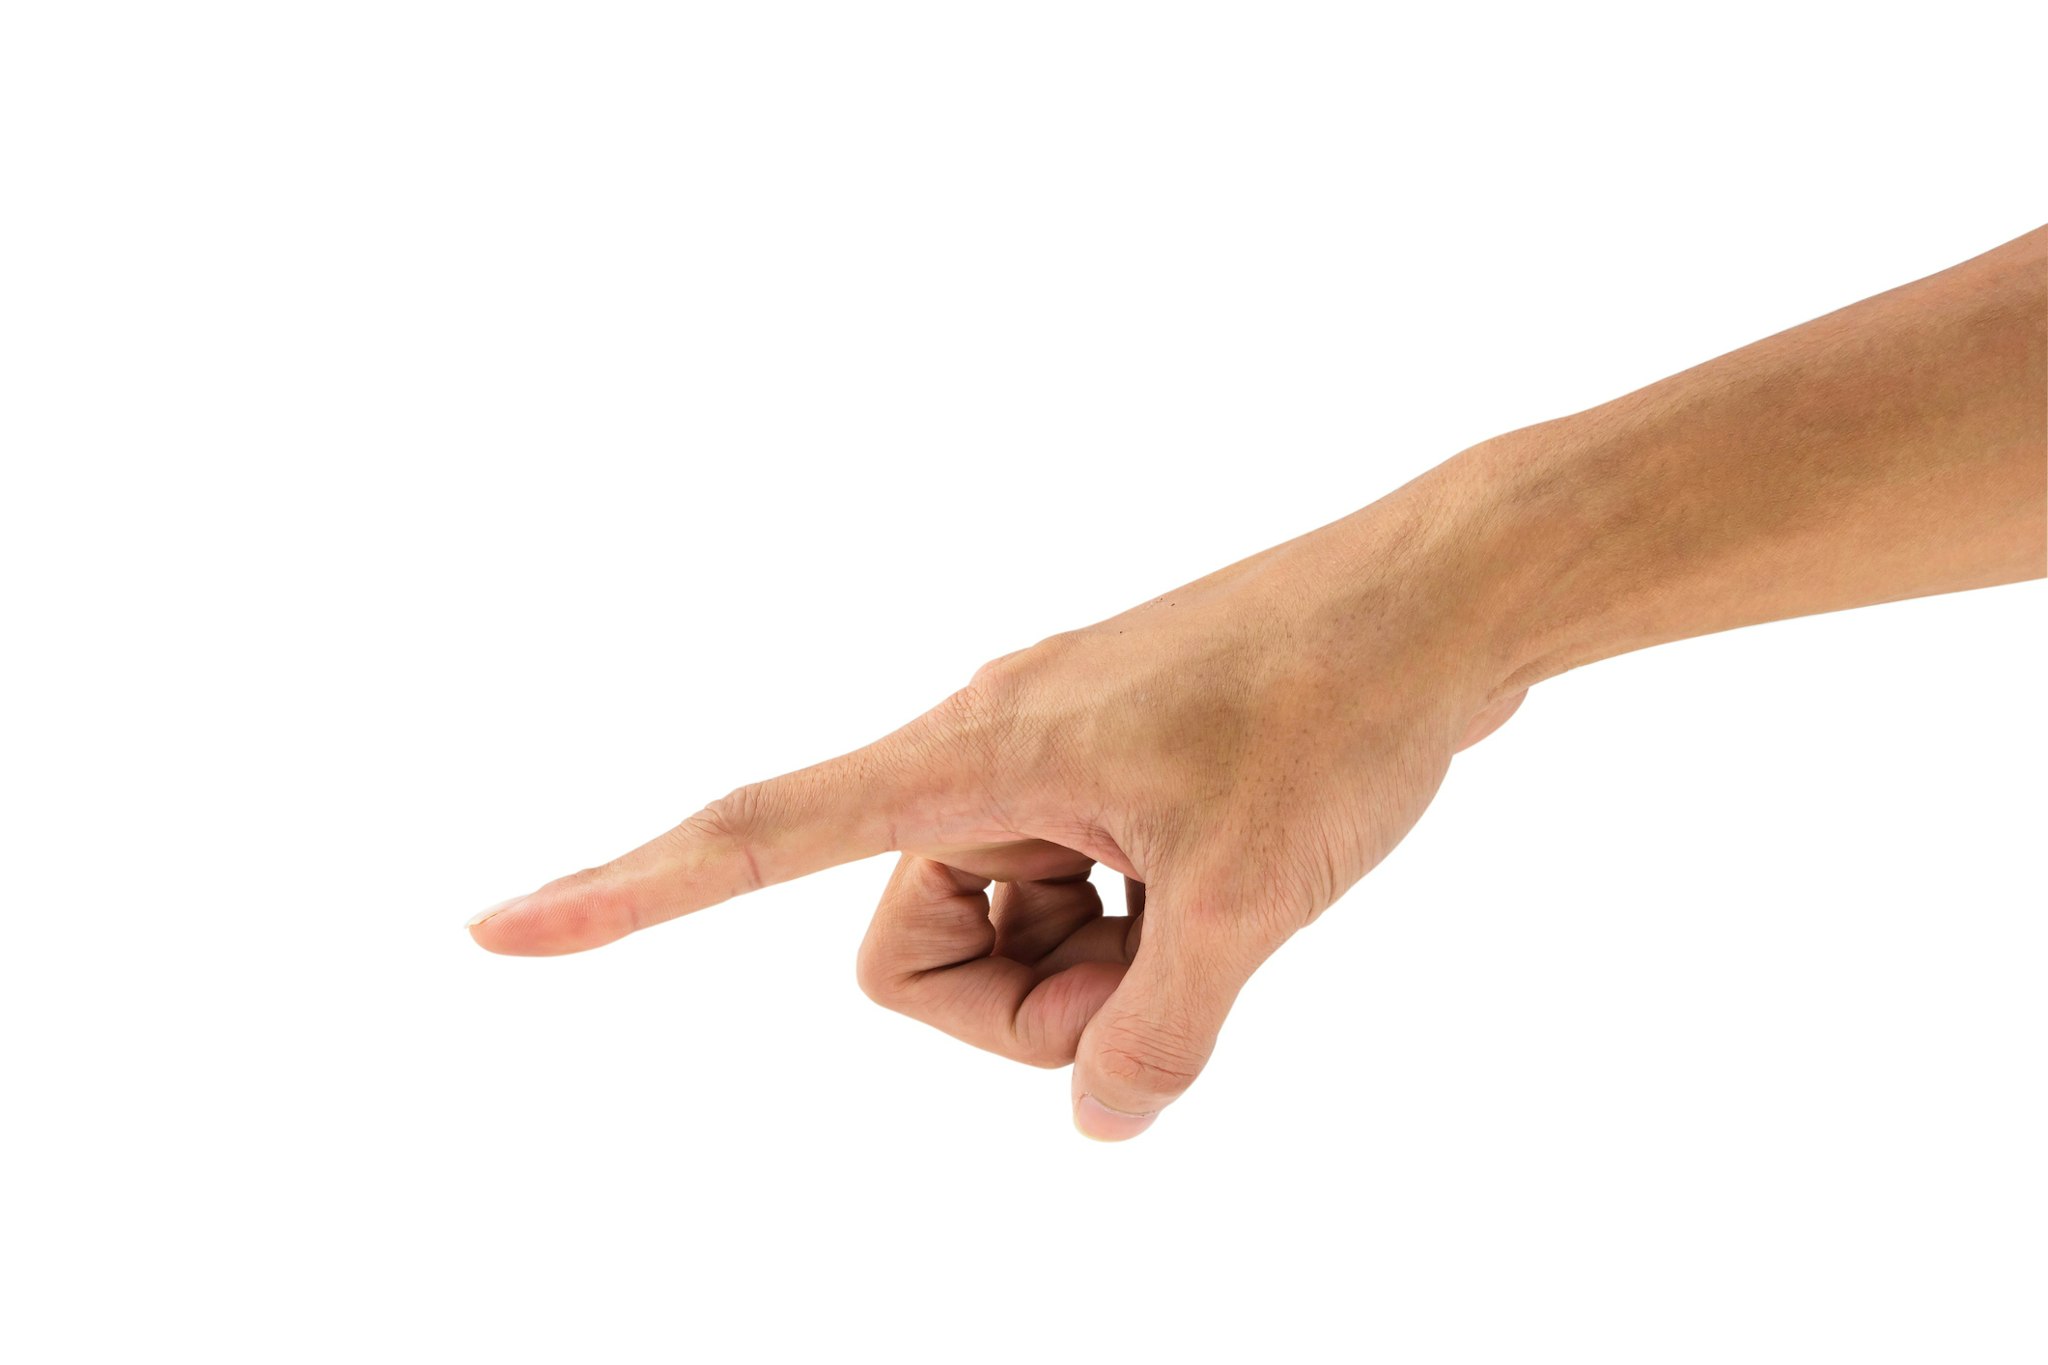 Cropped Hand Of Woman Pointing Against White Background - stock photo